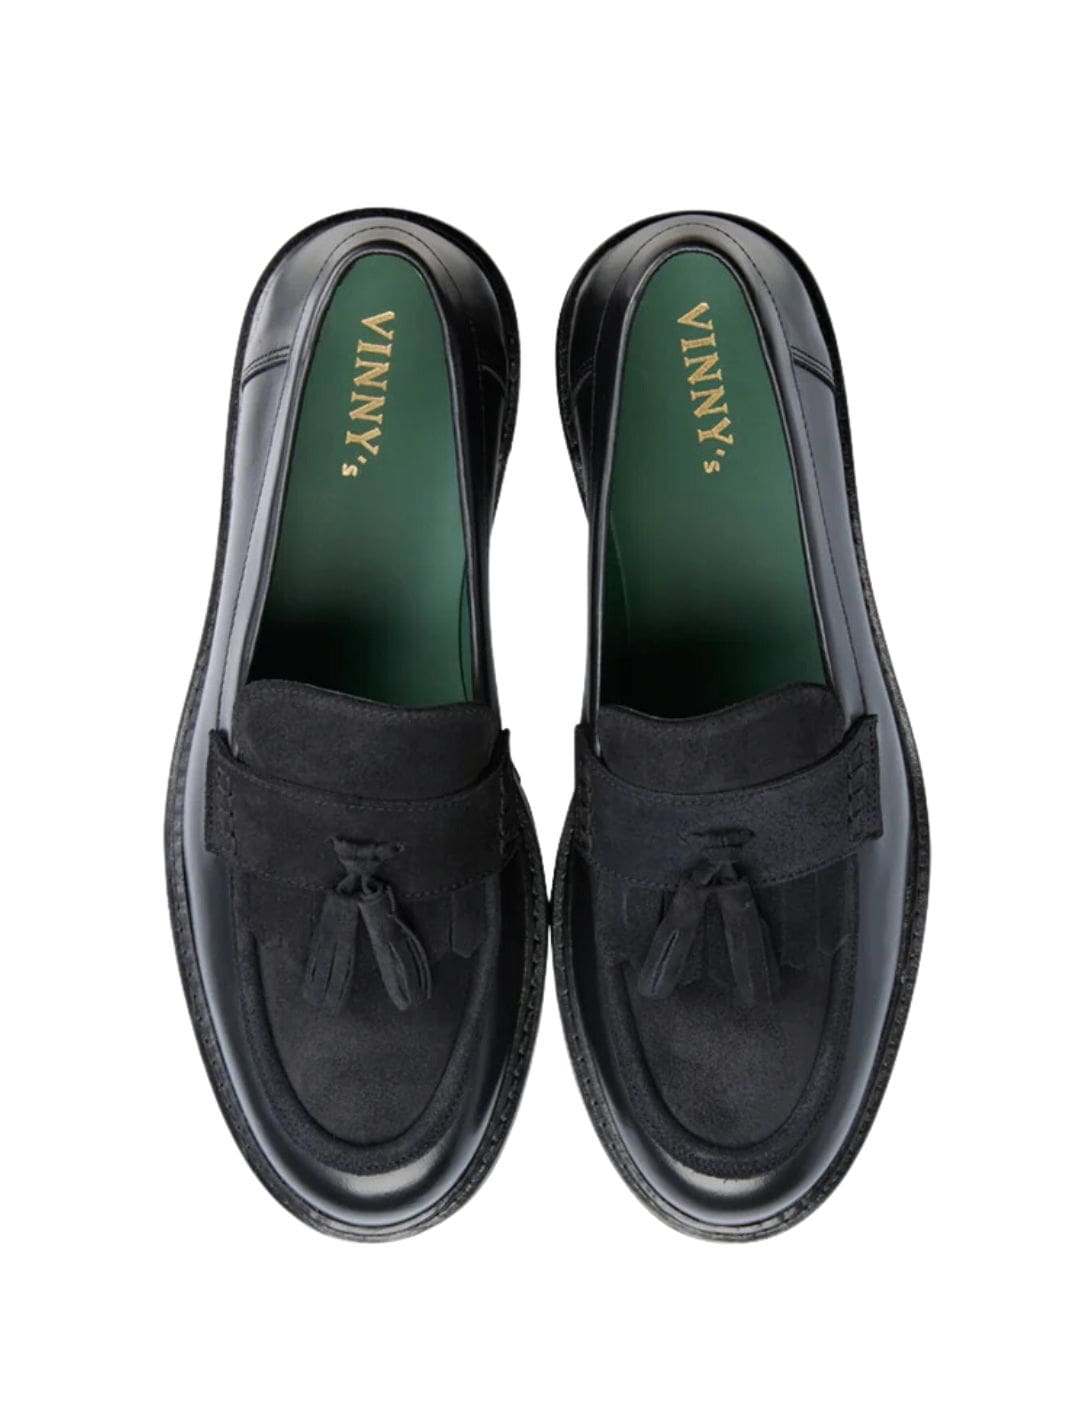 Vinny's Shoes Loafers | Richee Penny Loafers